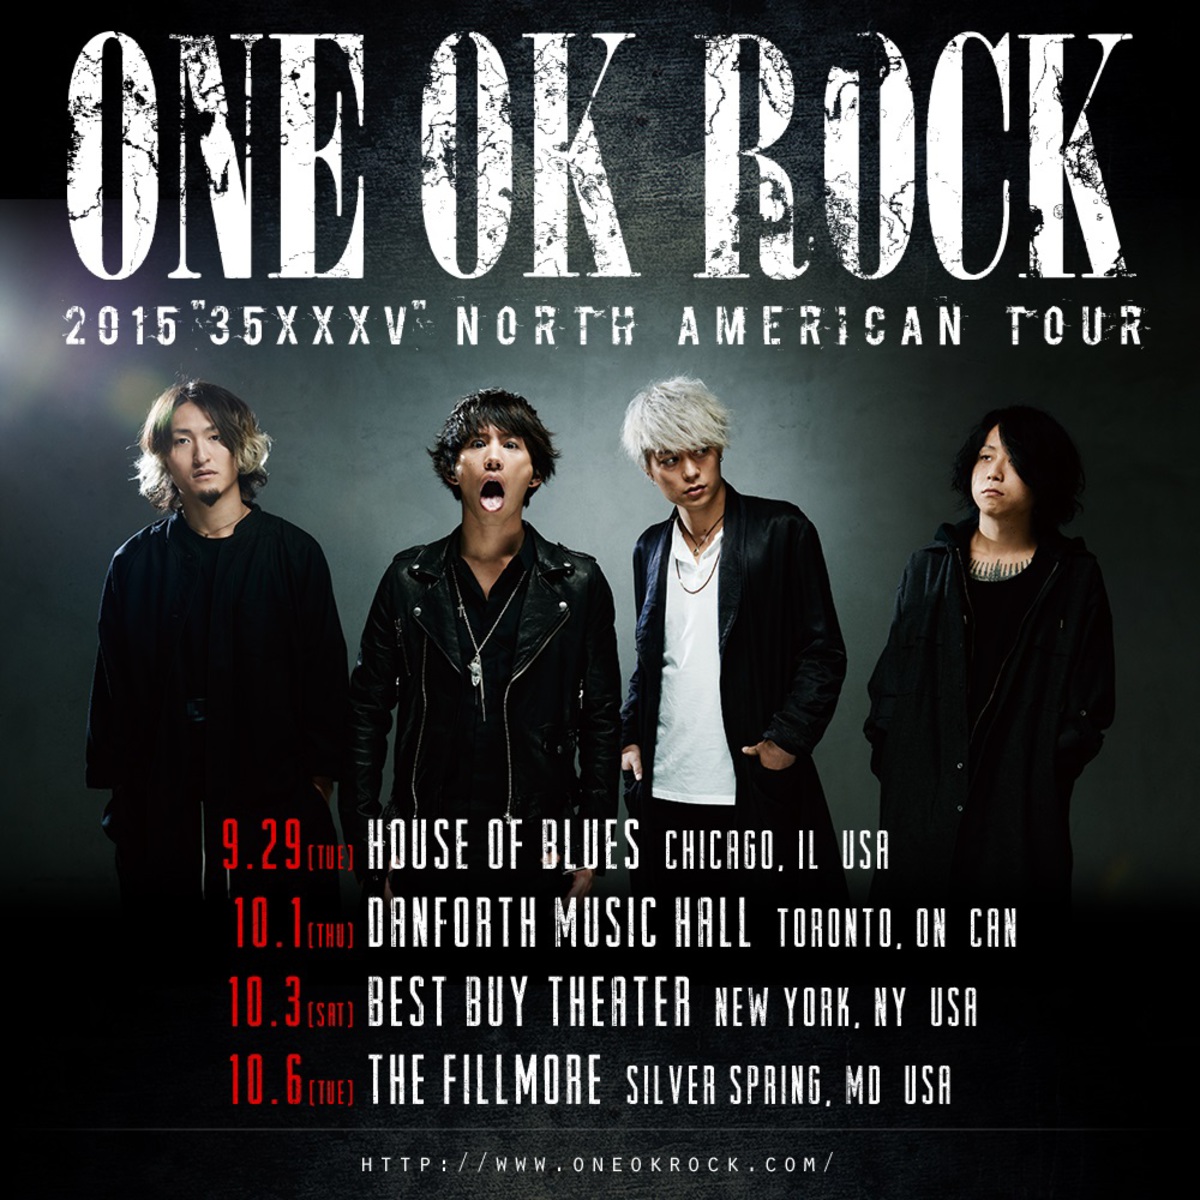 ONE OK ROCK、アメリカのWARNER BROS. RECORDSと契約！北米で9/25に『35xxxv Deluxe Edition